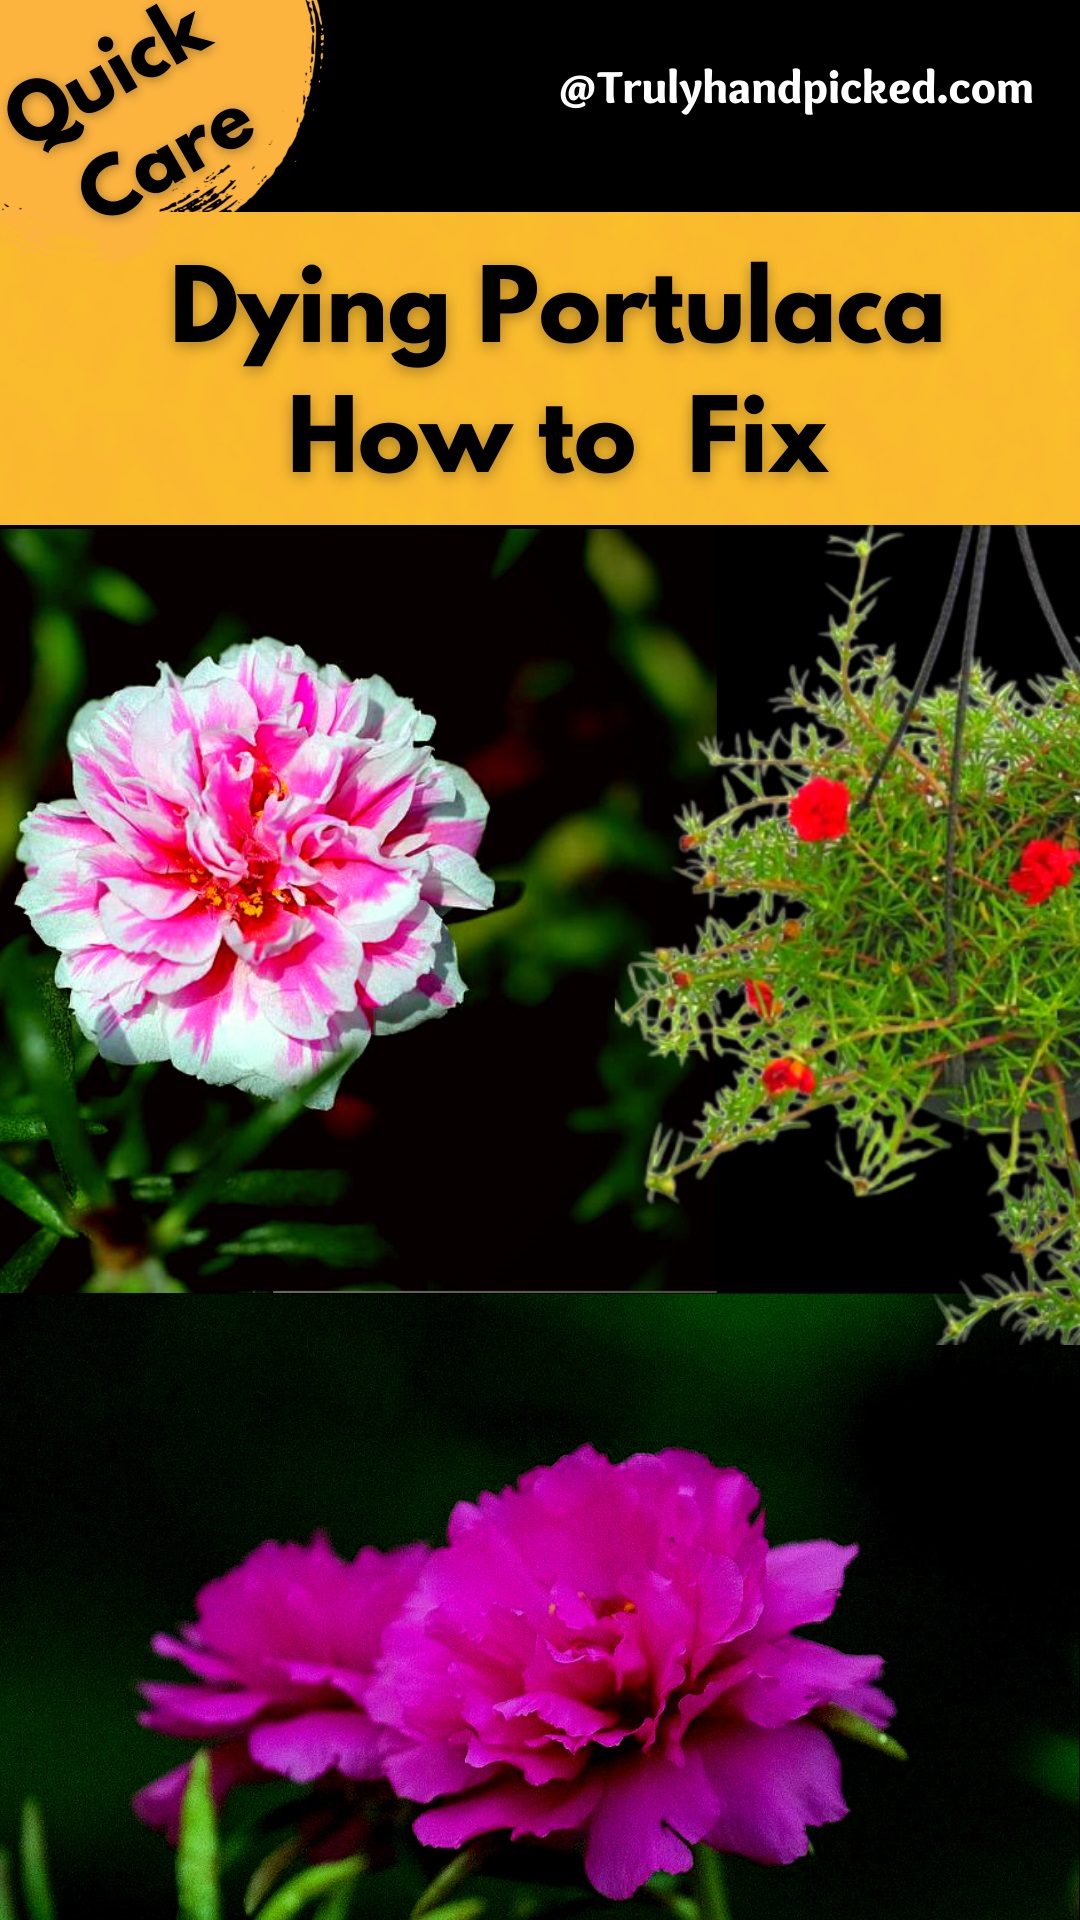 Pinterest Image: How to care for Portulaca Plants - Revive a Dying Portulaca